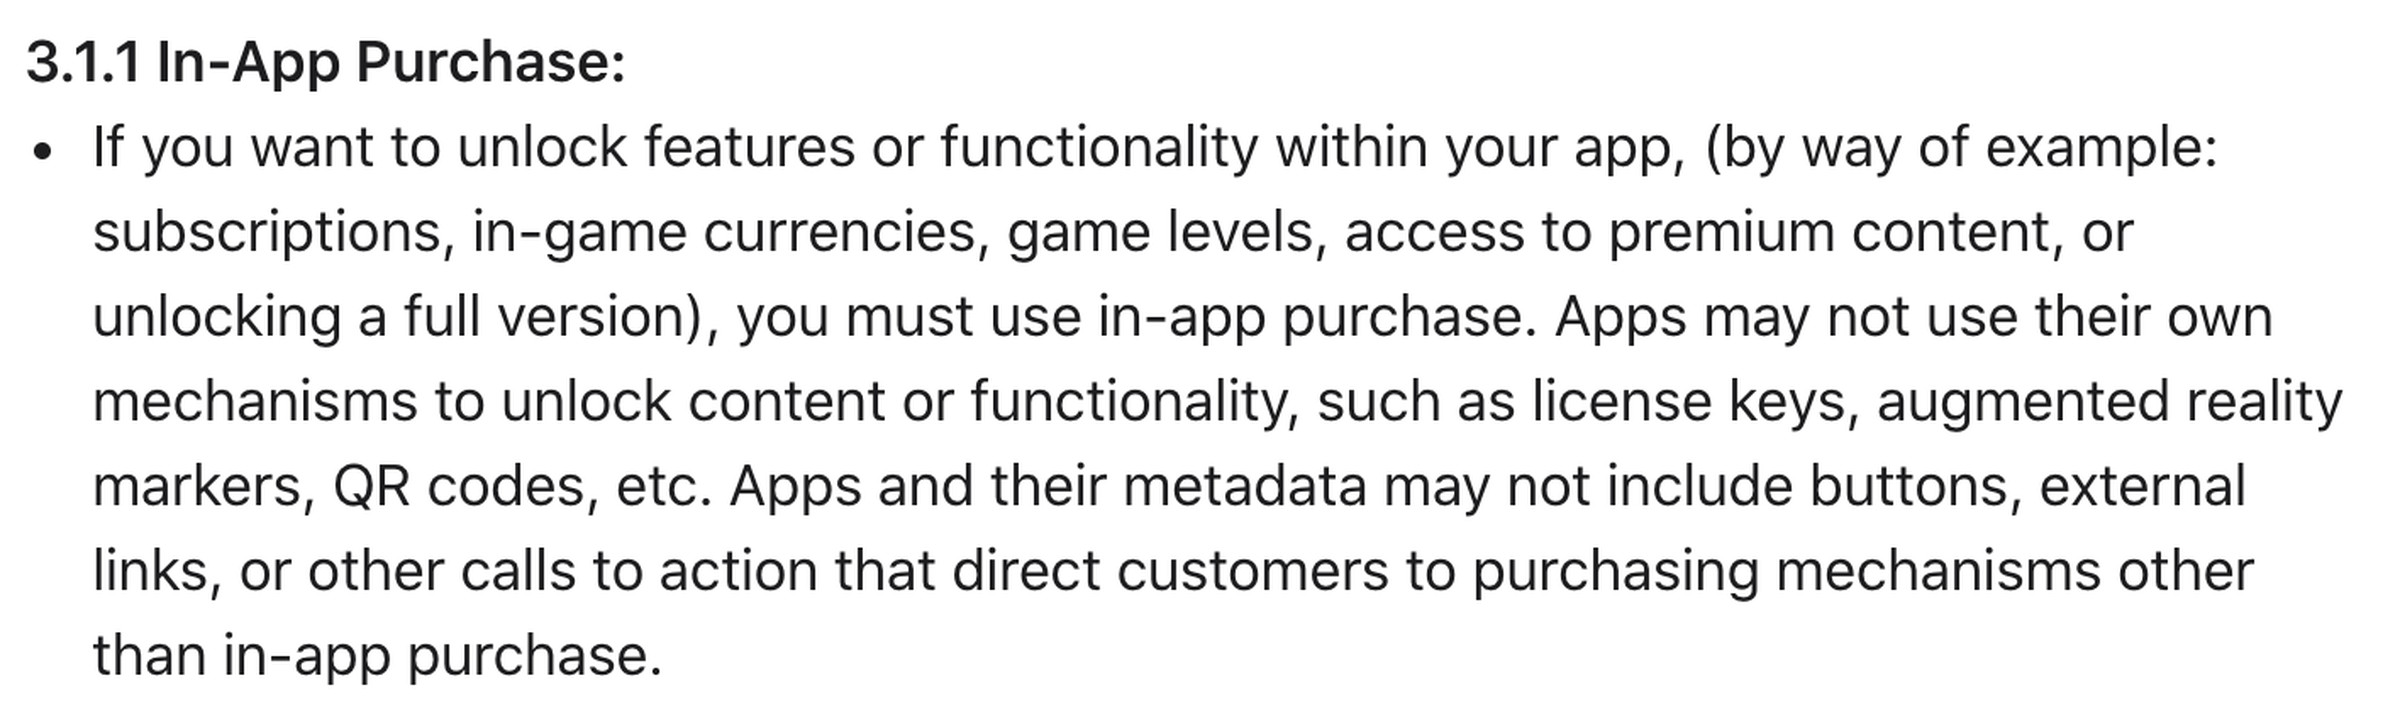 Apple’s developer policy for offering subscriptions.